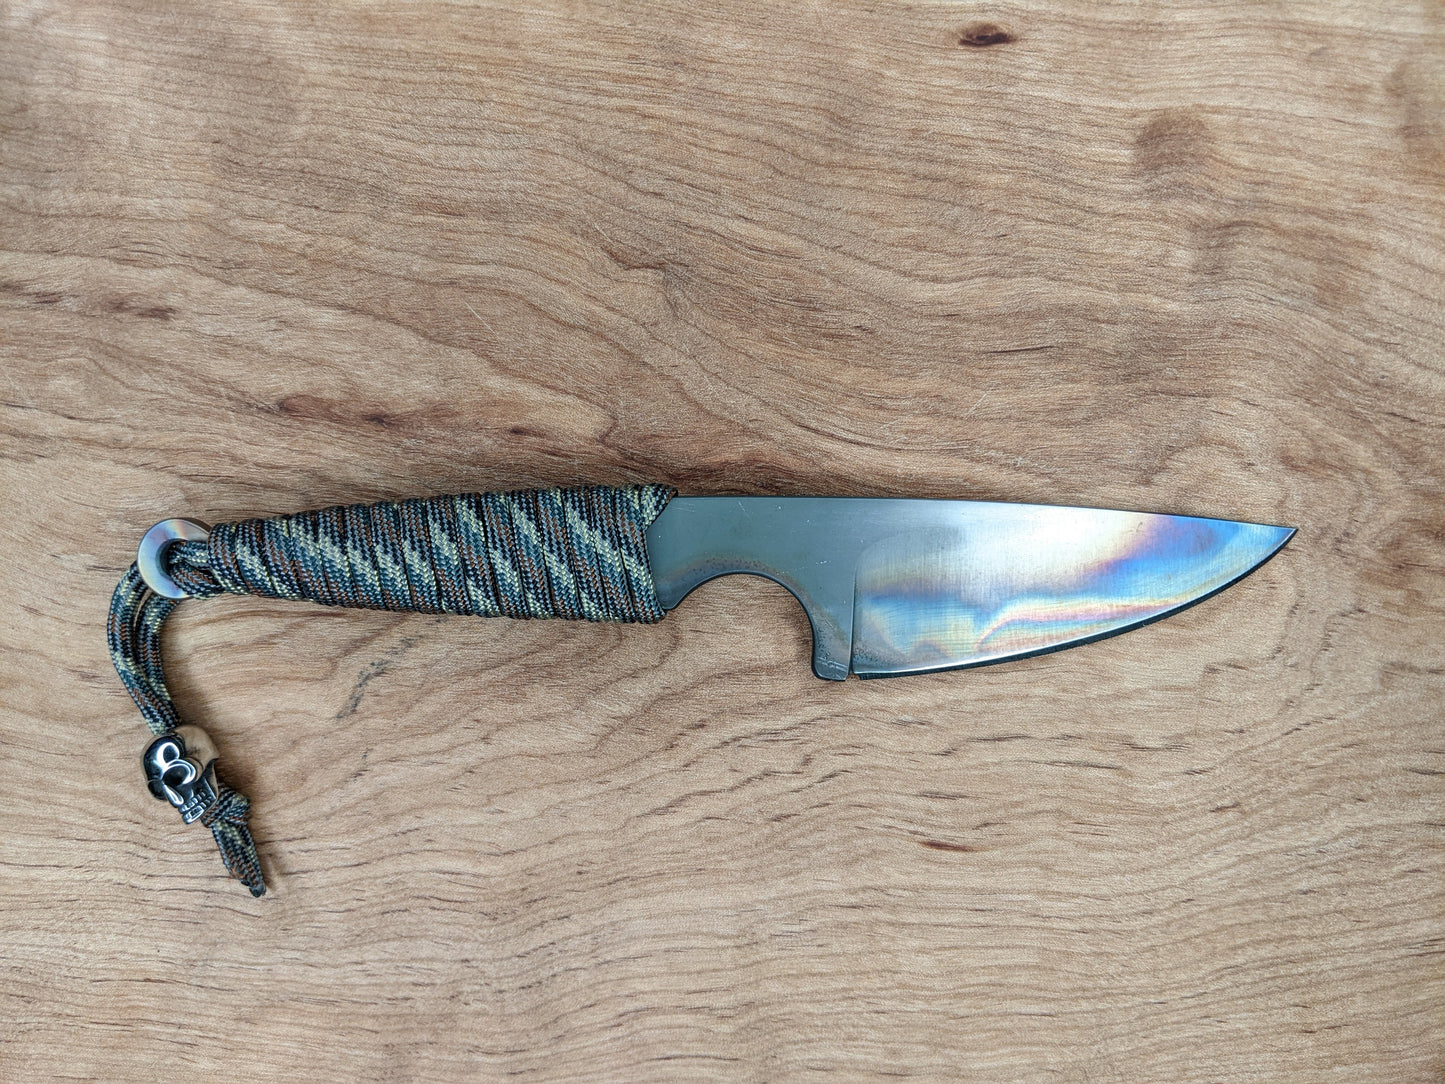 small knife with heat-treating colors and paracord wrapped handle with a metal skull bead, on wooden background